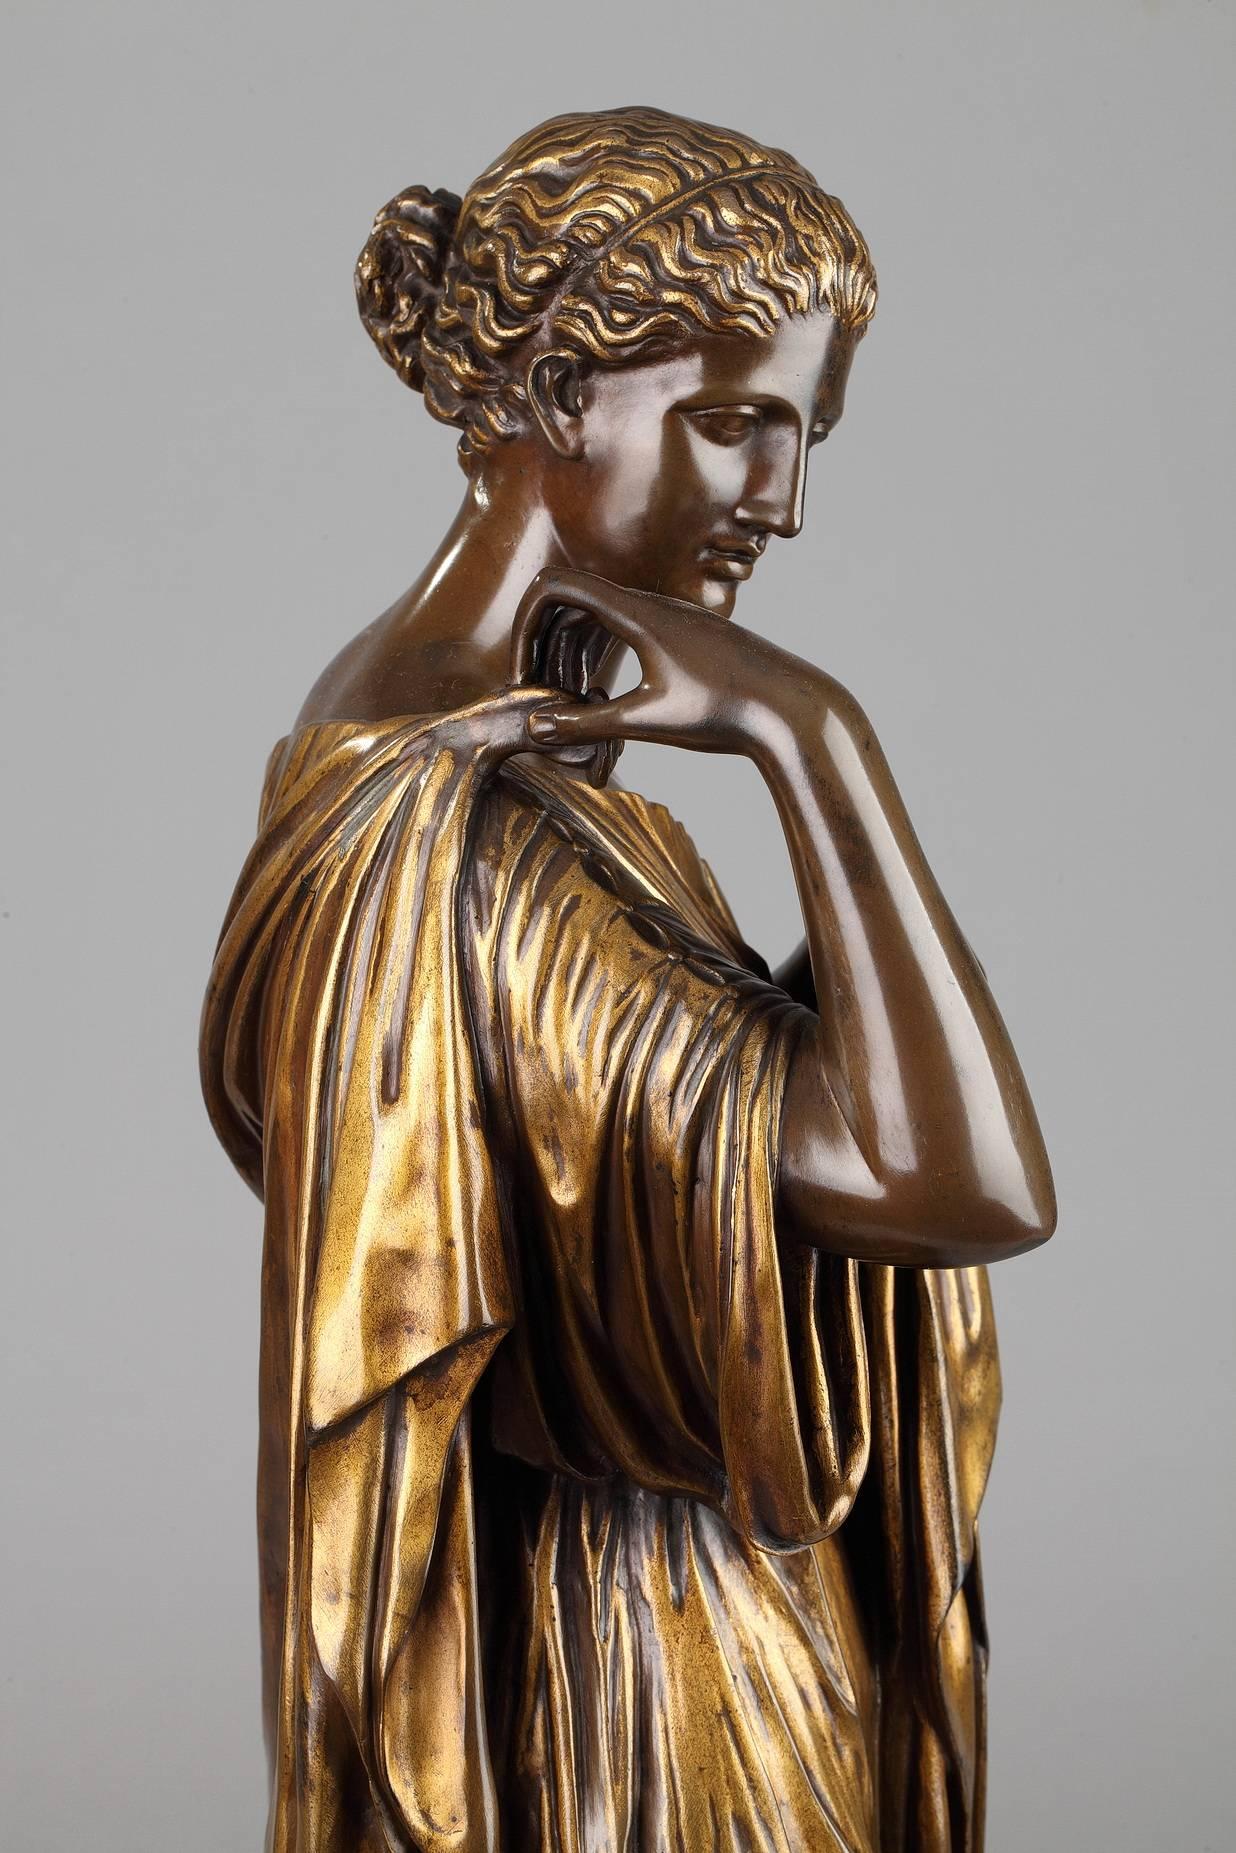 Mid-19th century bronze sculpture of the godess Artemis, also known as 